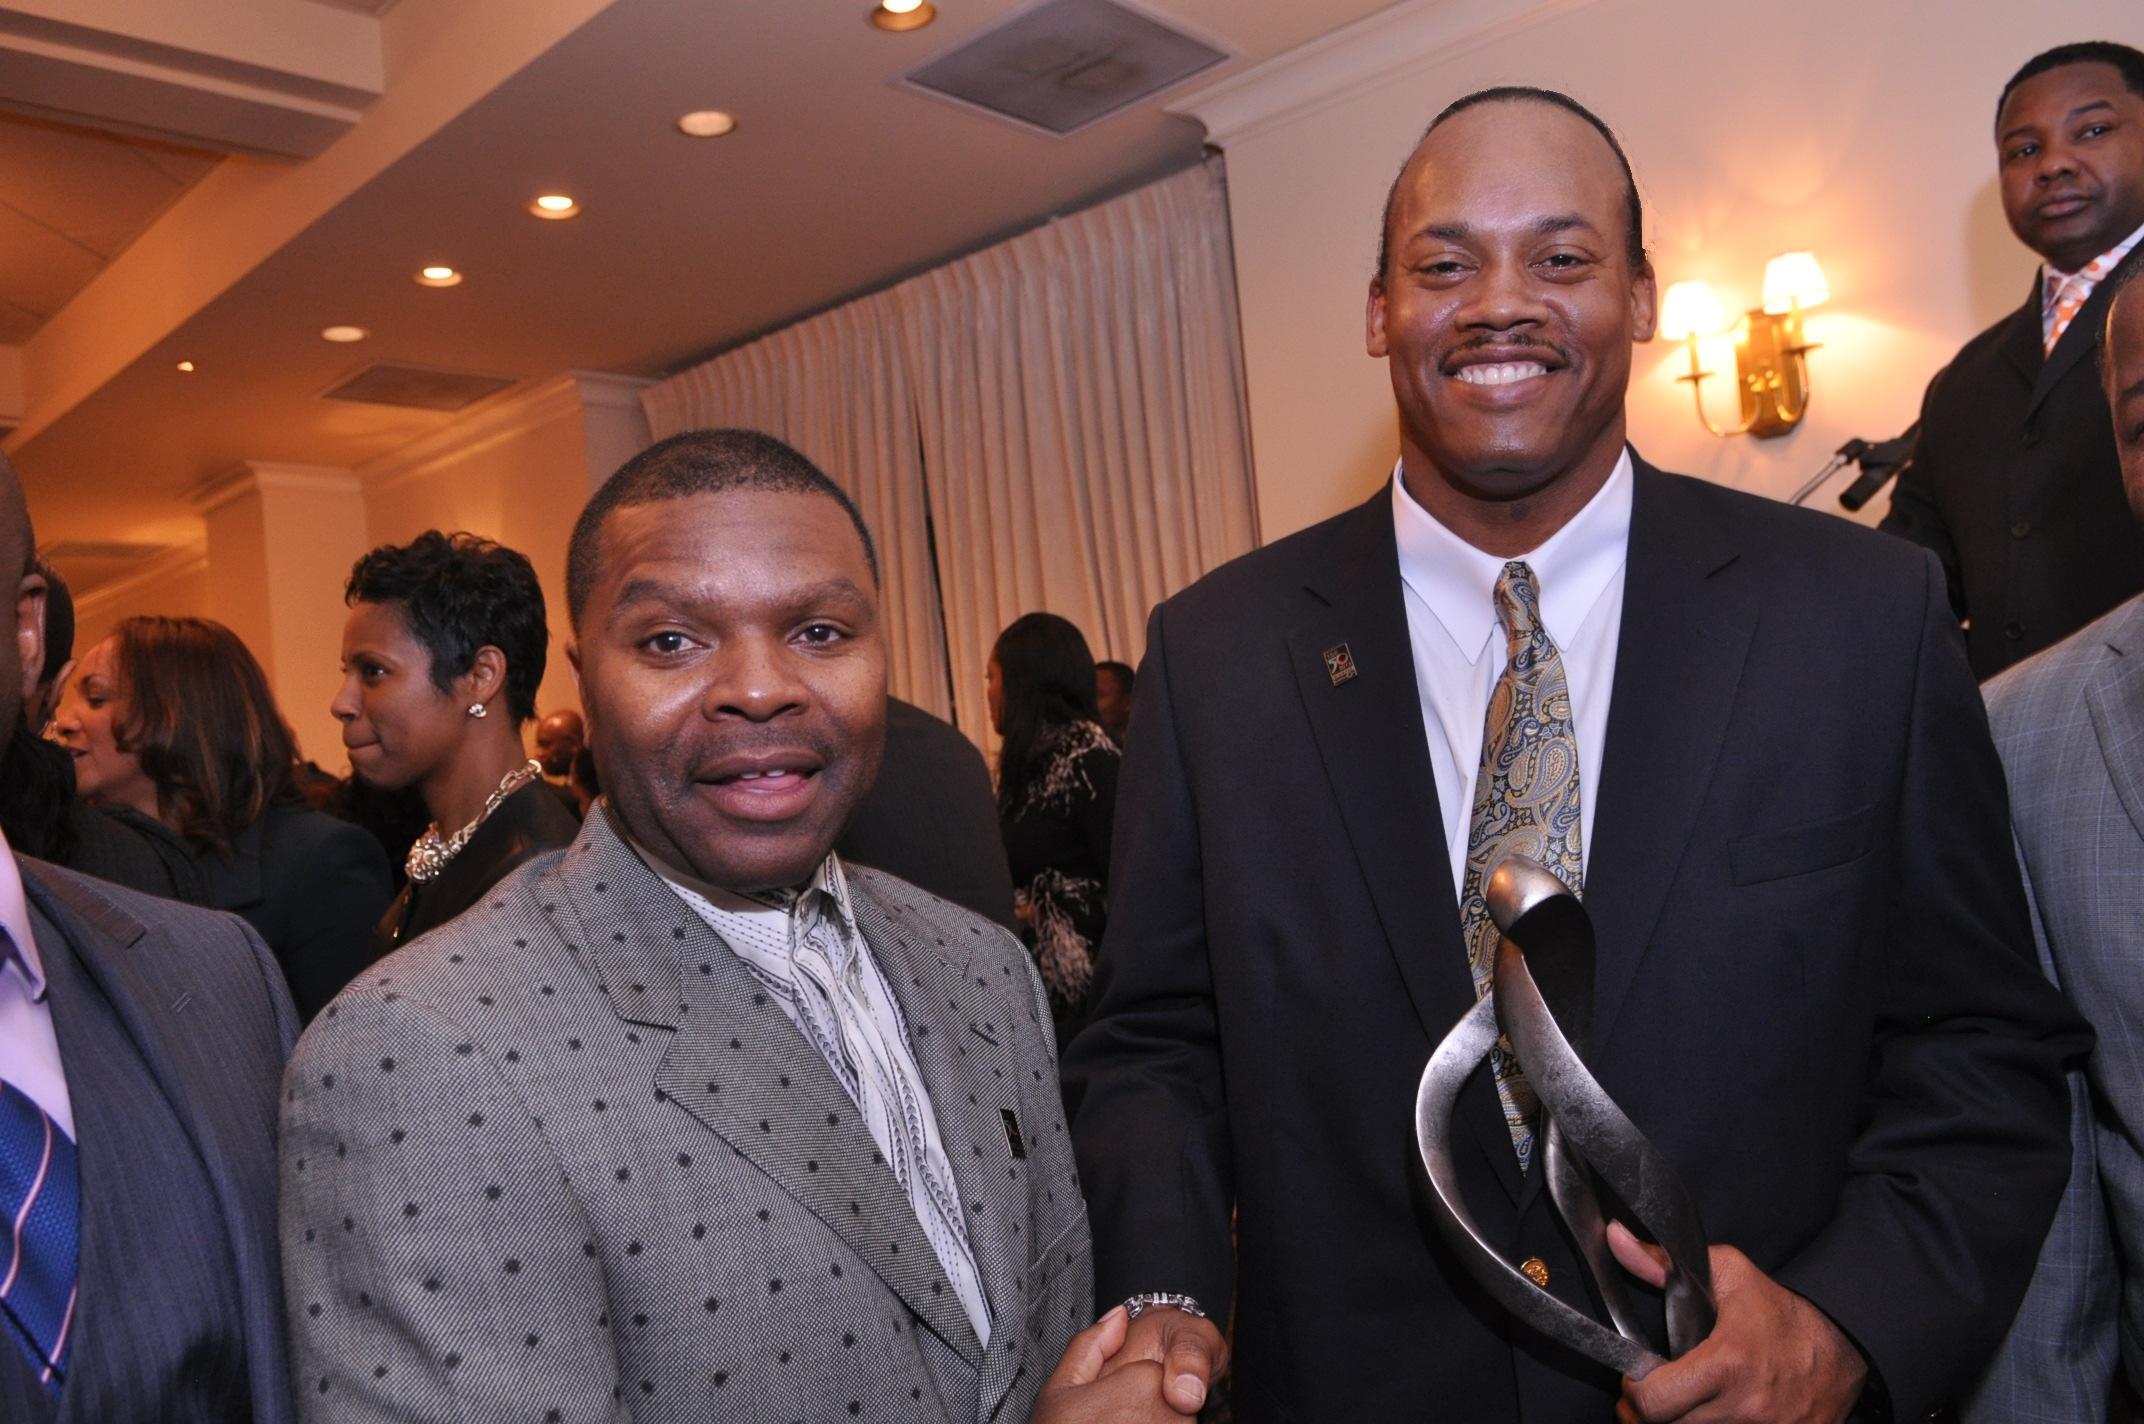 Filmmaker Greg Carter with James Prince, CEO and President of Rap-A-Lot Records at the Top 50 Black Professional & Entrepreneurs Award Show in Houston, Texas.